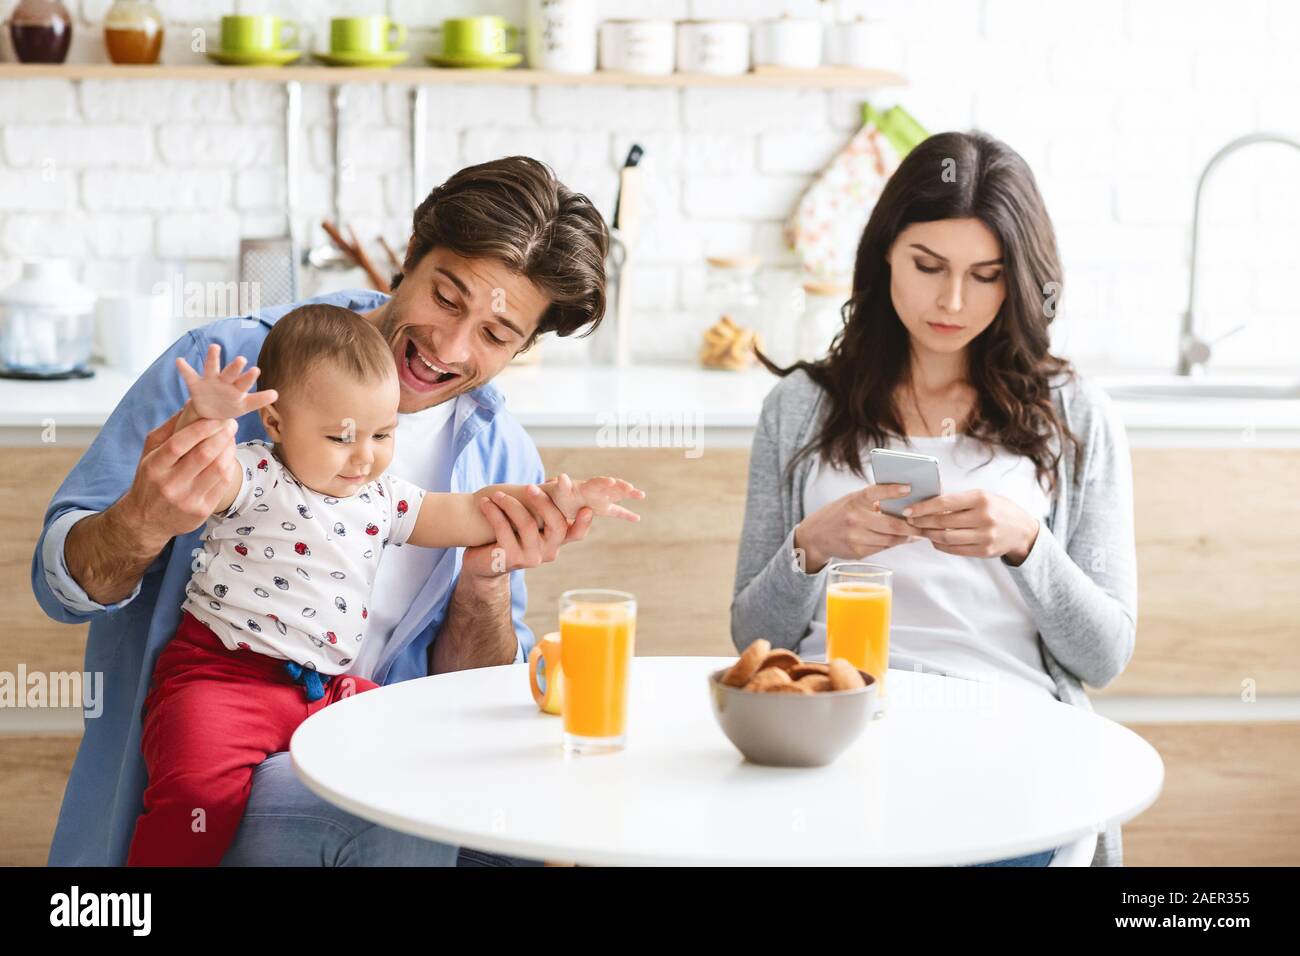 Absorbed woman browsing on phone, ignoring her family Stock Photo